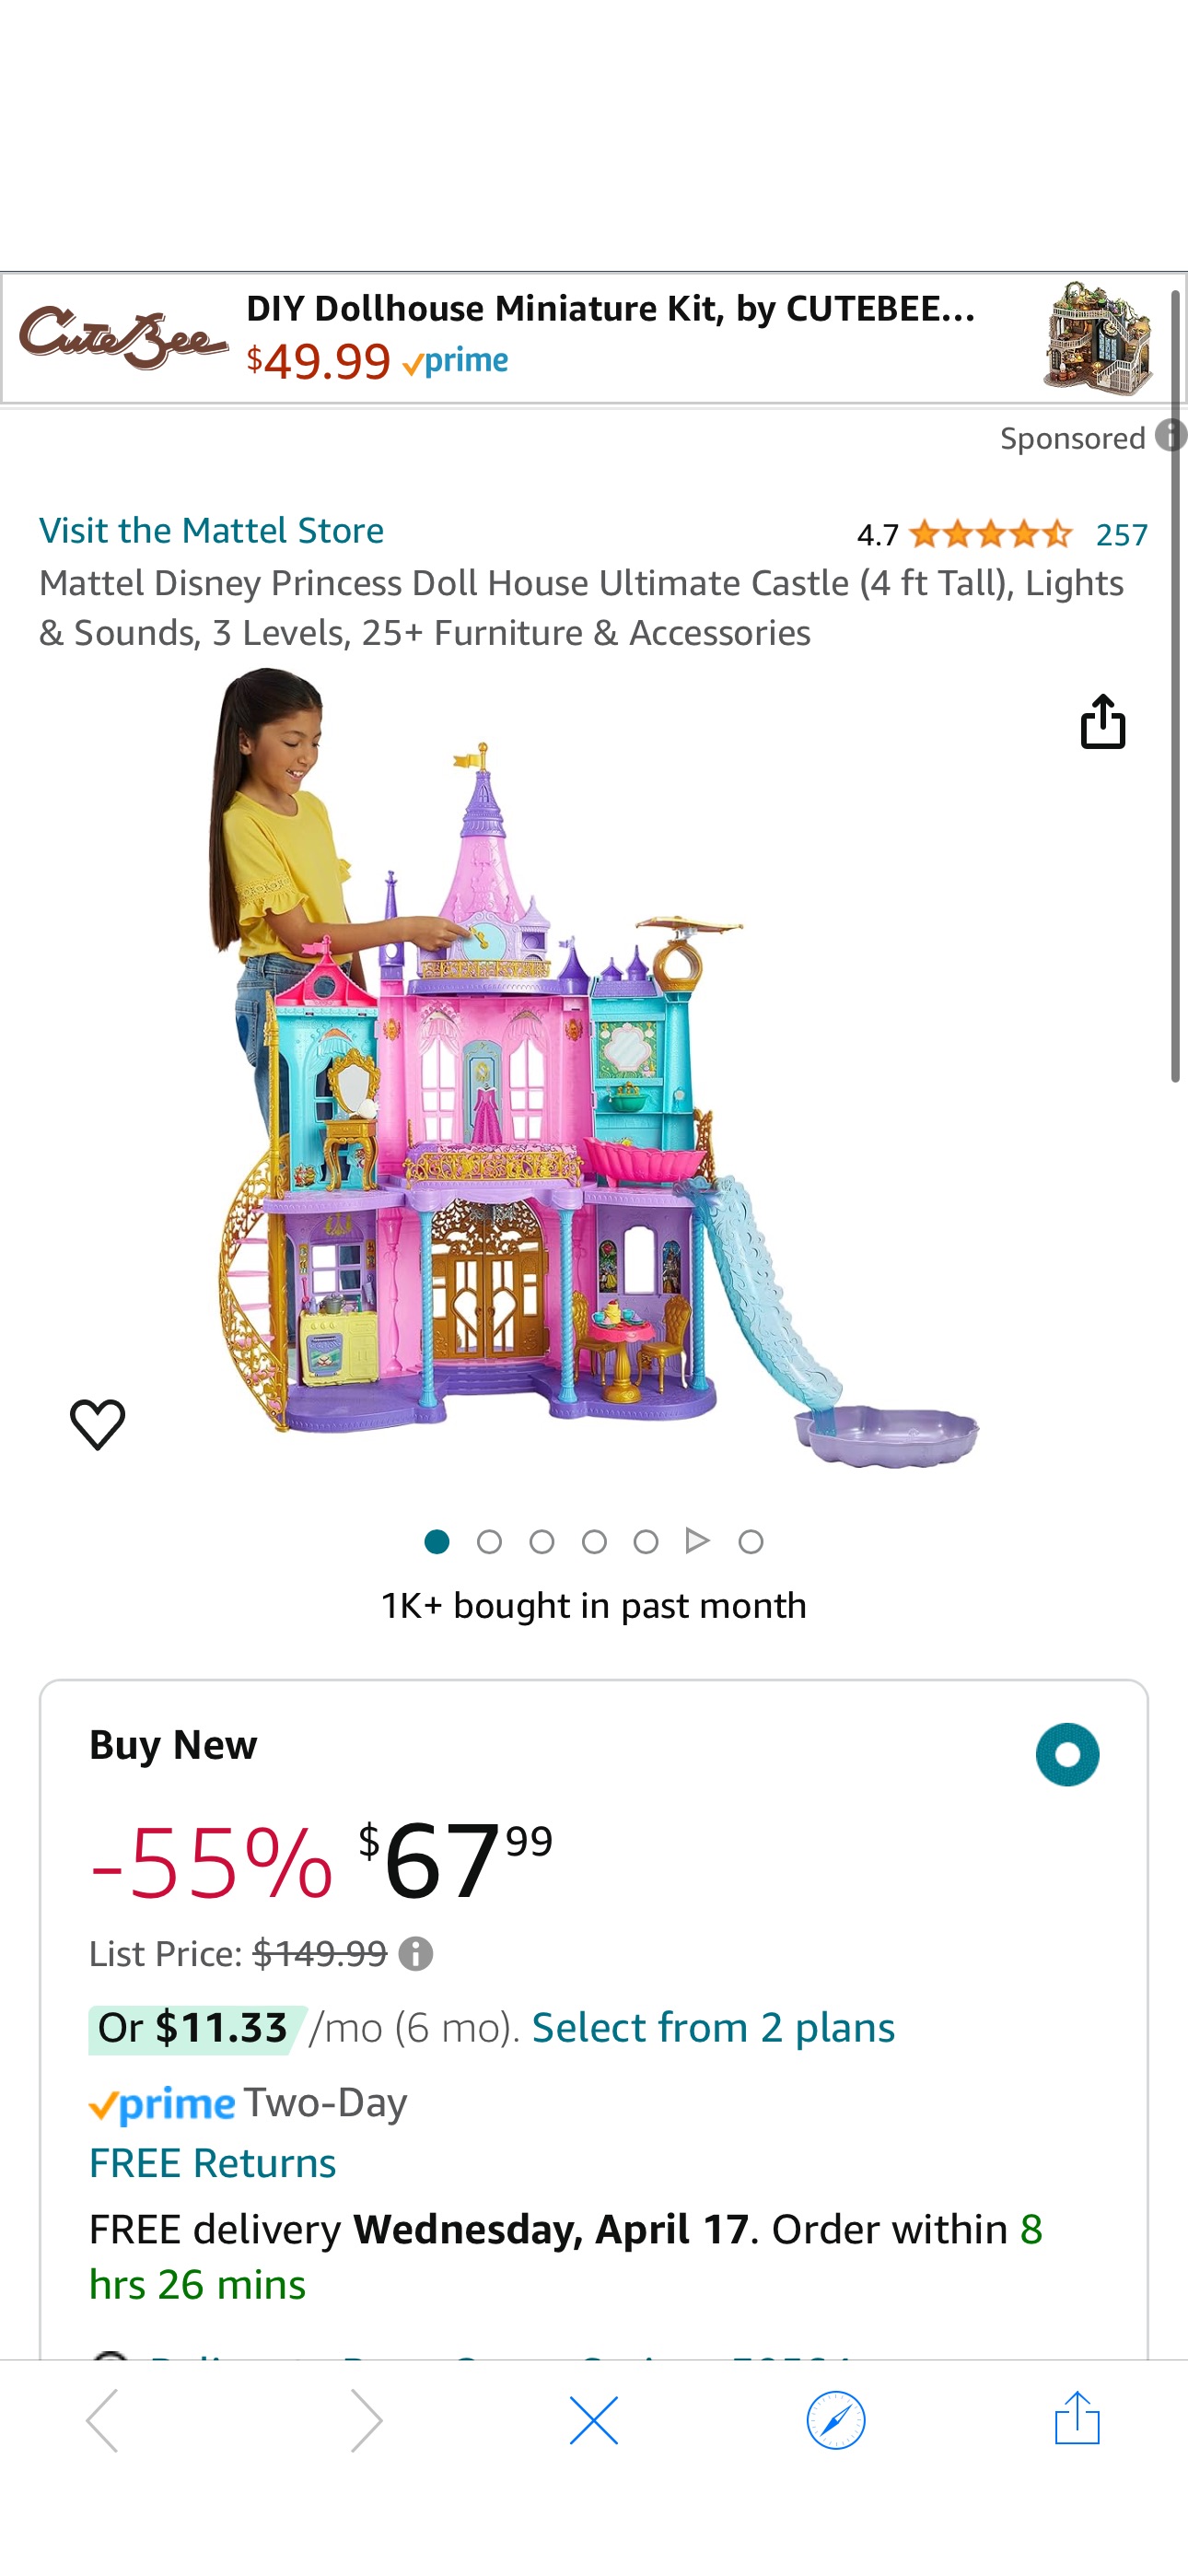 Amazon.com: Mattel Disney Princess Doll House Ultimate Castle (4 ft Tall), Lights & Sounds, 3 Levels, 25+ Furniture & Accessories : Toys & Games